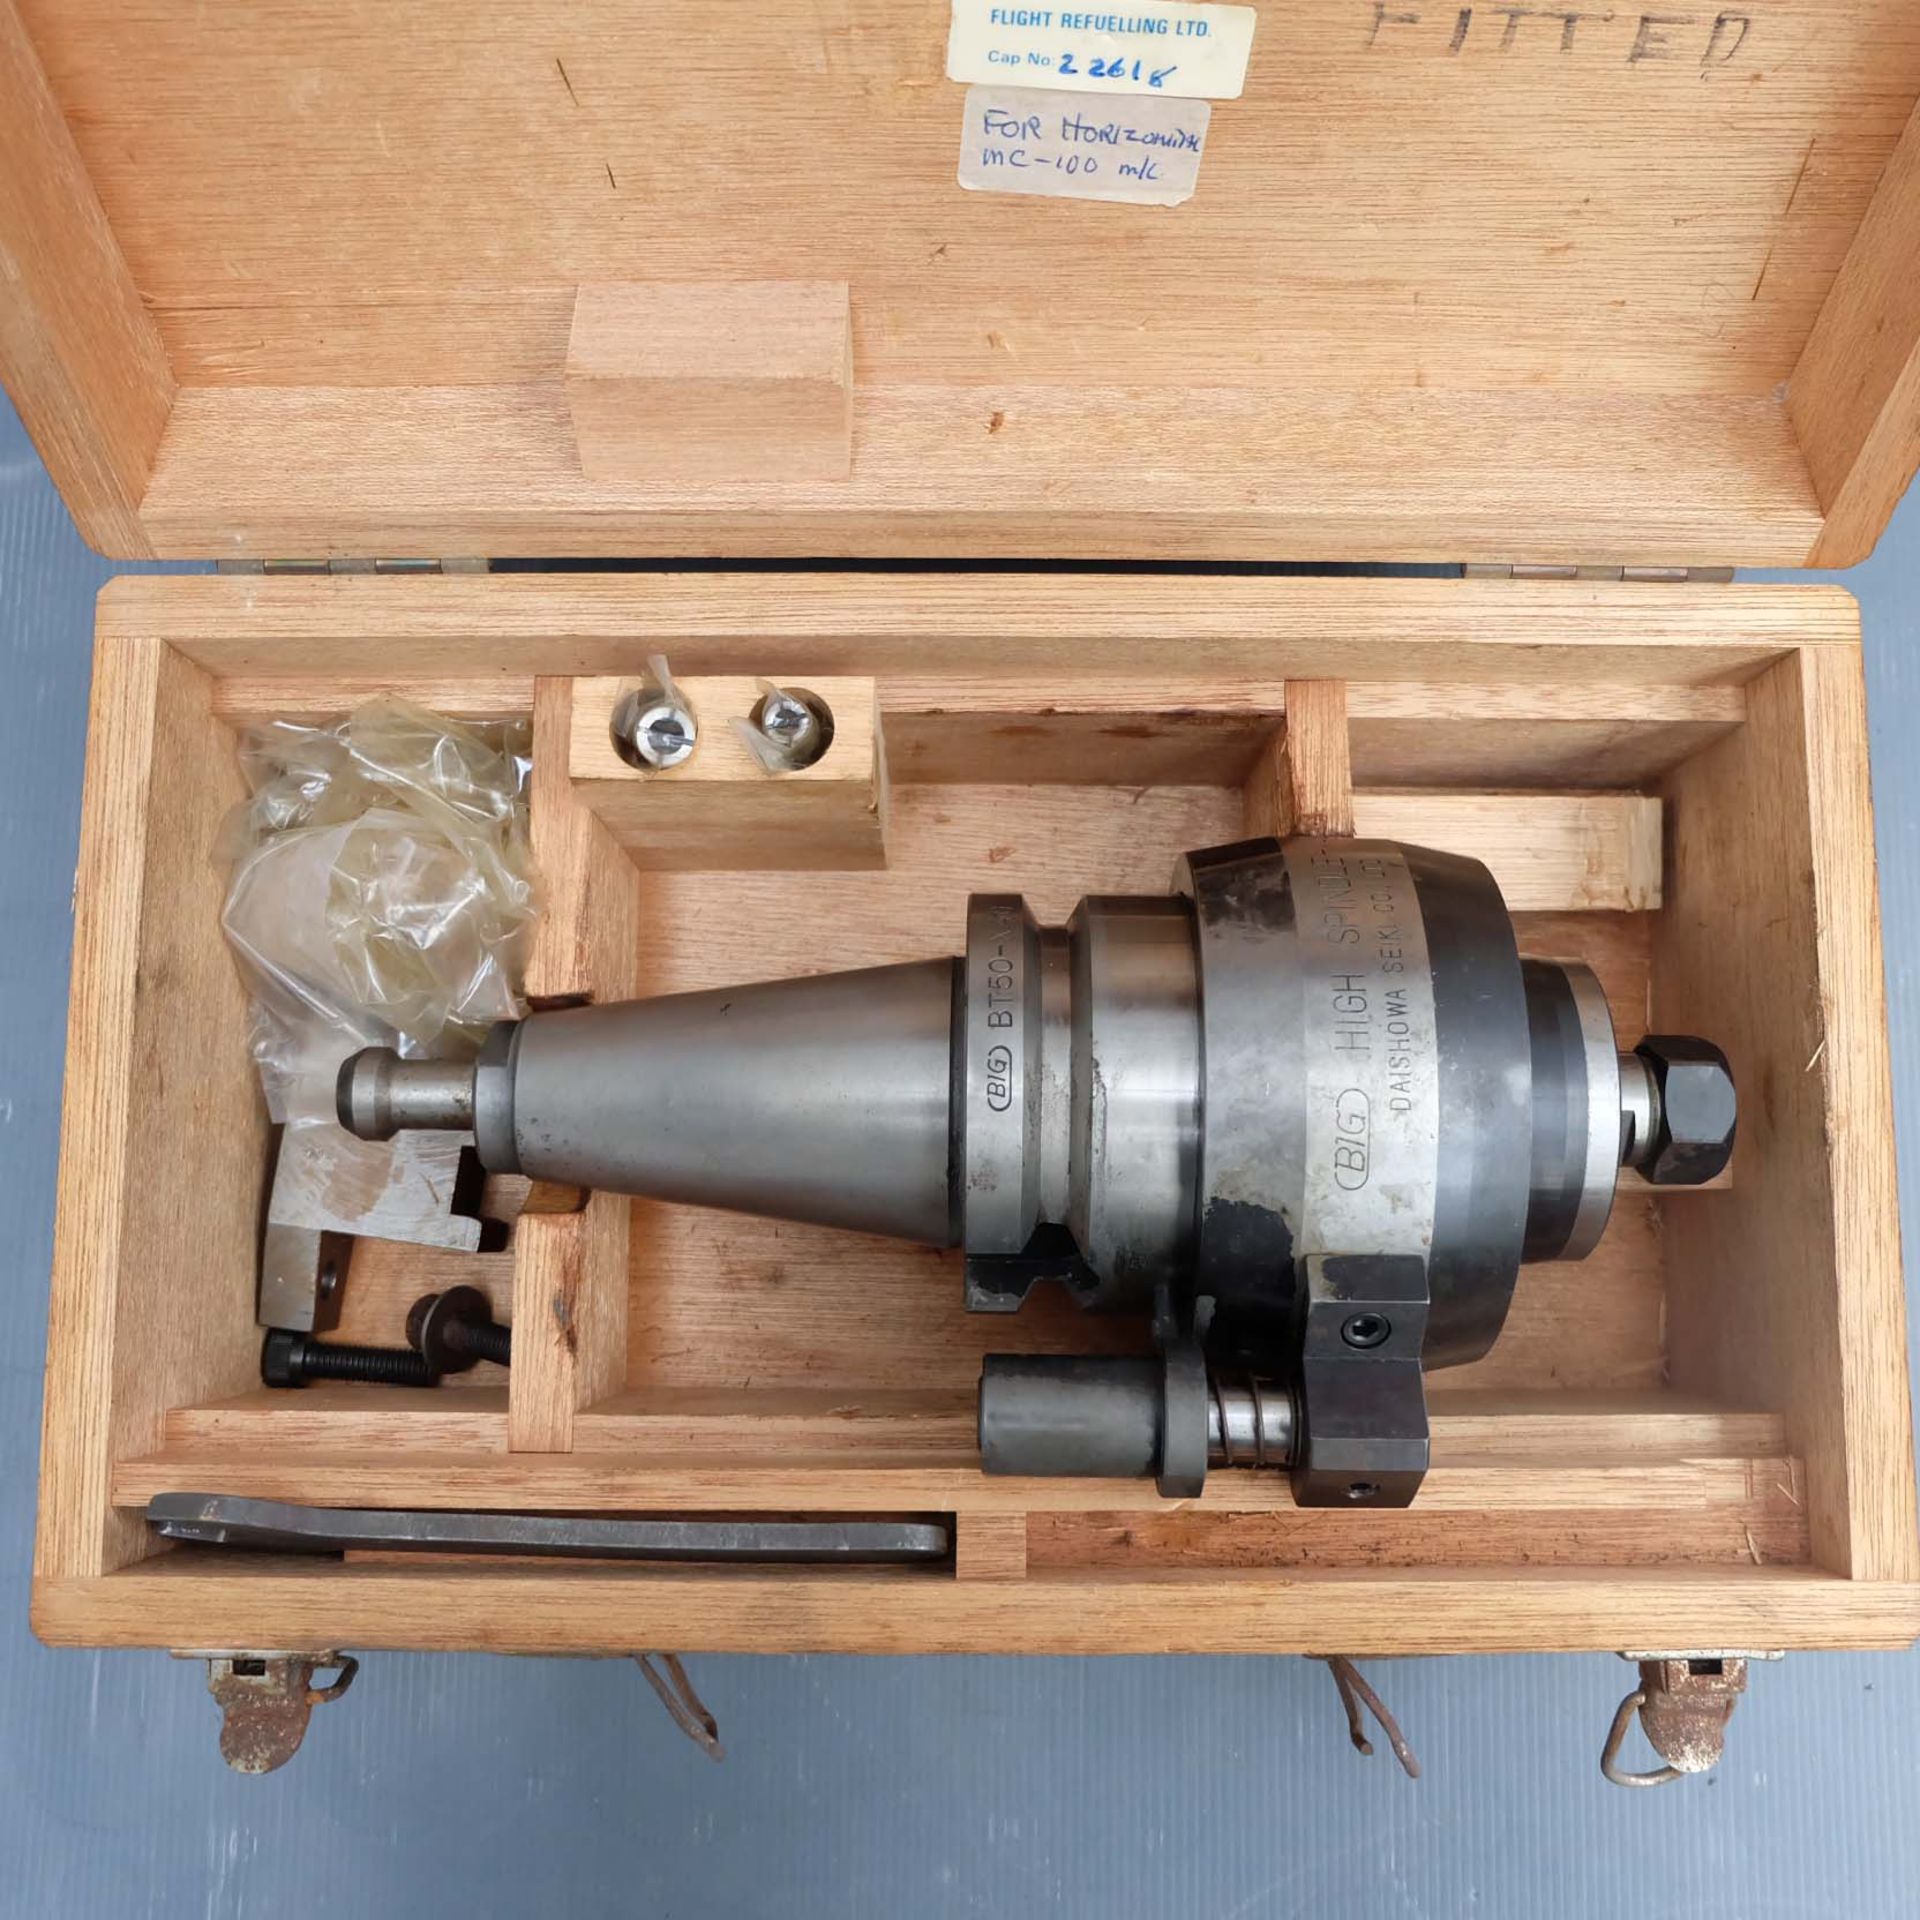 B I G High Spindle - X4G Speed Increaser by Daishower Seiki Co Ltd. With BT50 Spindle. In Wooden Box